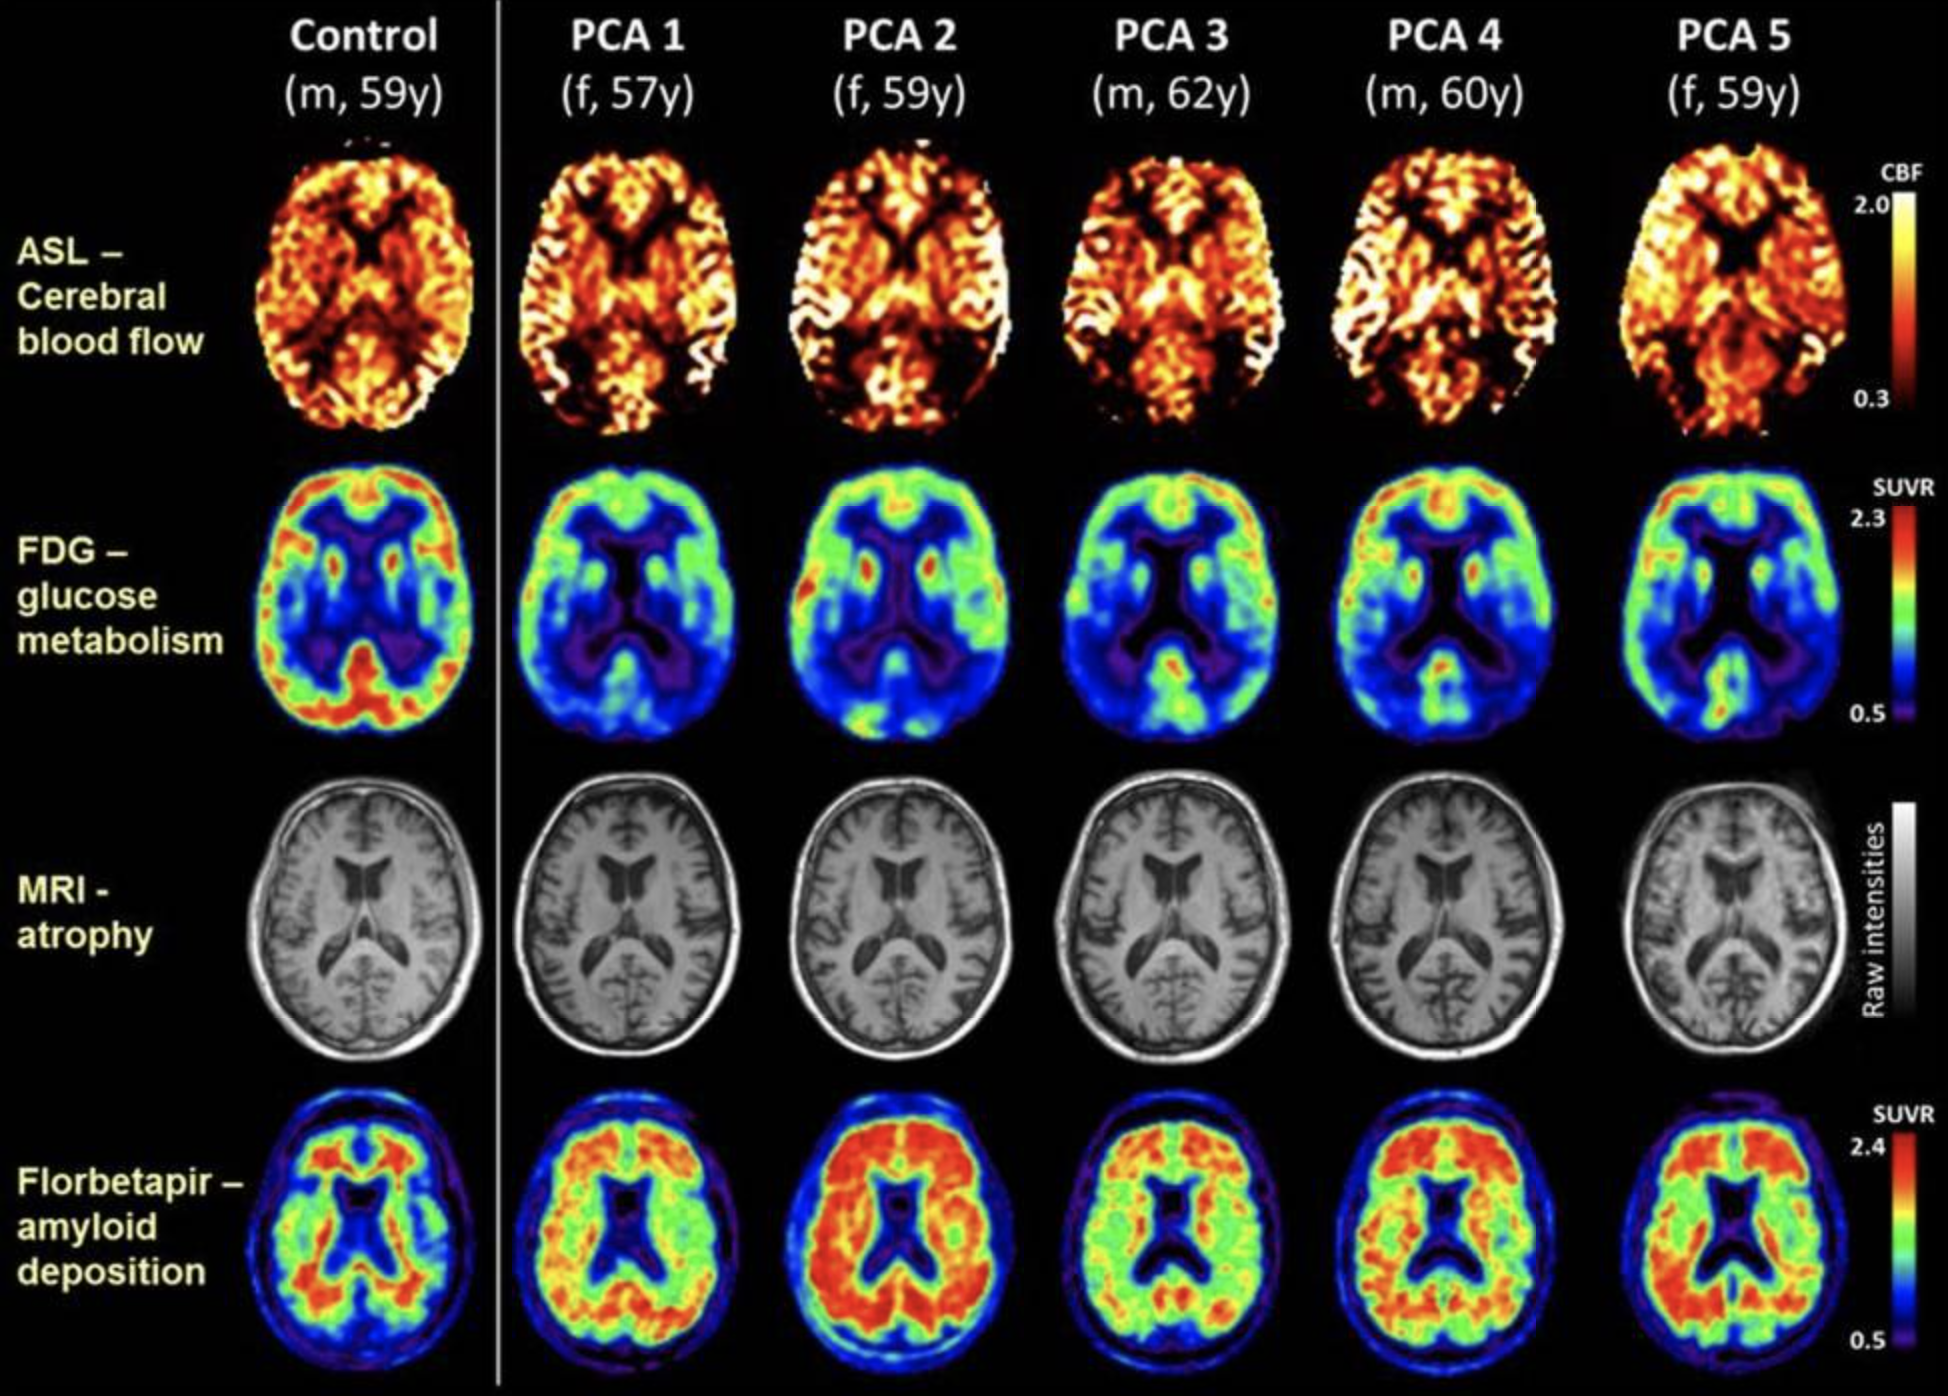 Single-participant axial images for one control participant and five patients with PCA showing cerebral blood flow (ASL), glucose metabolism (FDG-PET), atrophy (structural MRI), and amyloid deposition (florbetapir-PET)